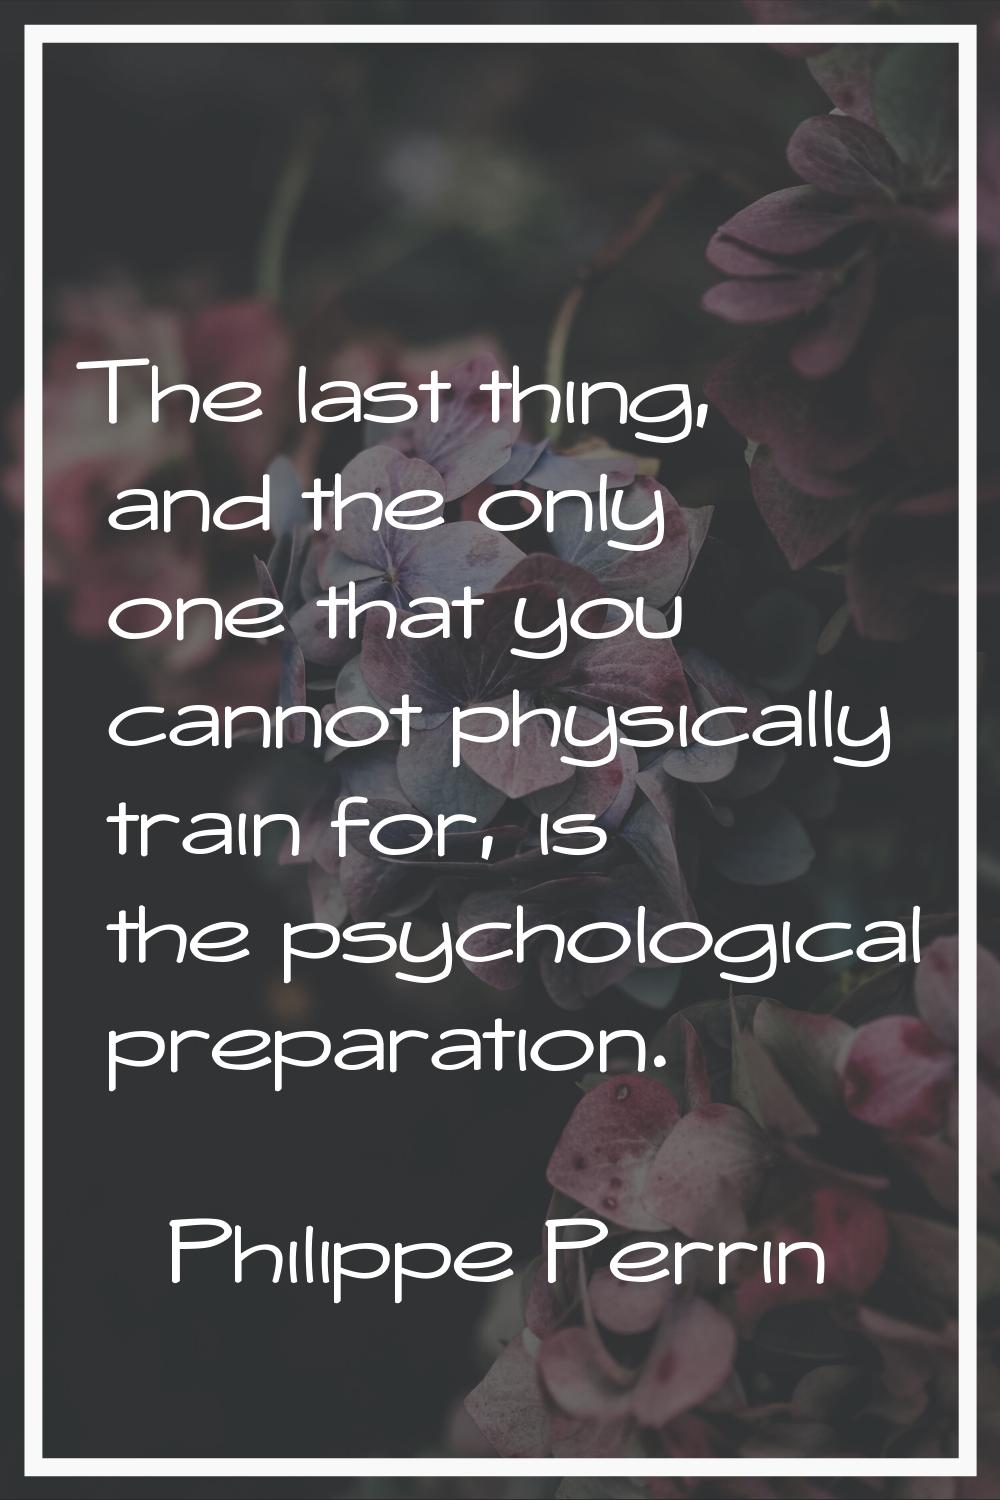 The last thing, and the only one that you cannot physically train for, is the psychological prepara